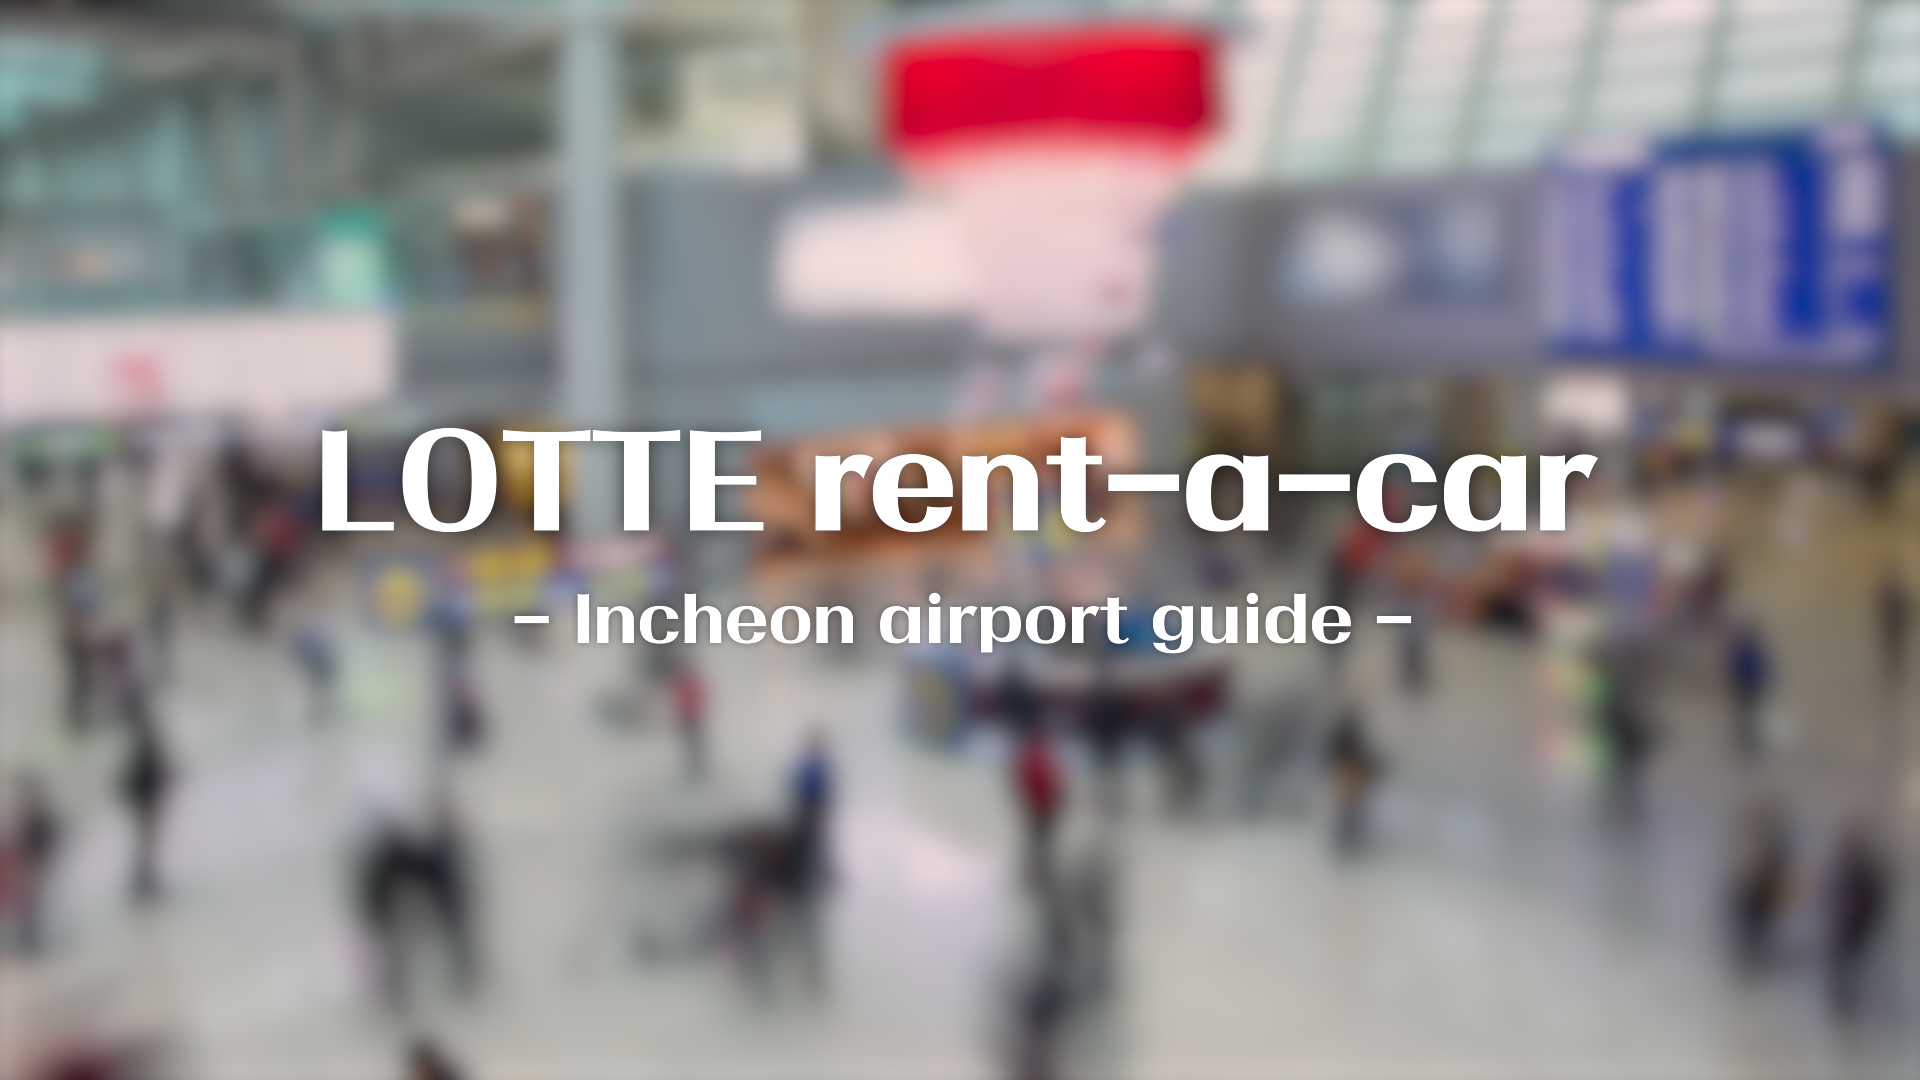 Incheon airport Guide